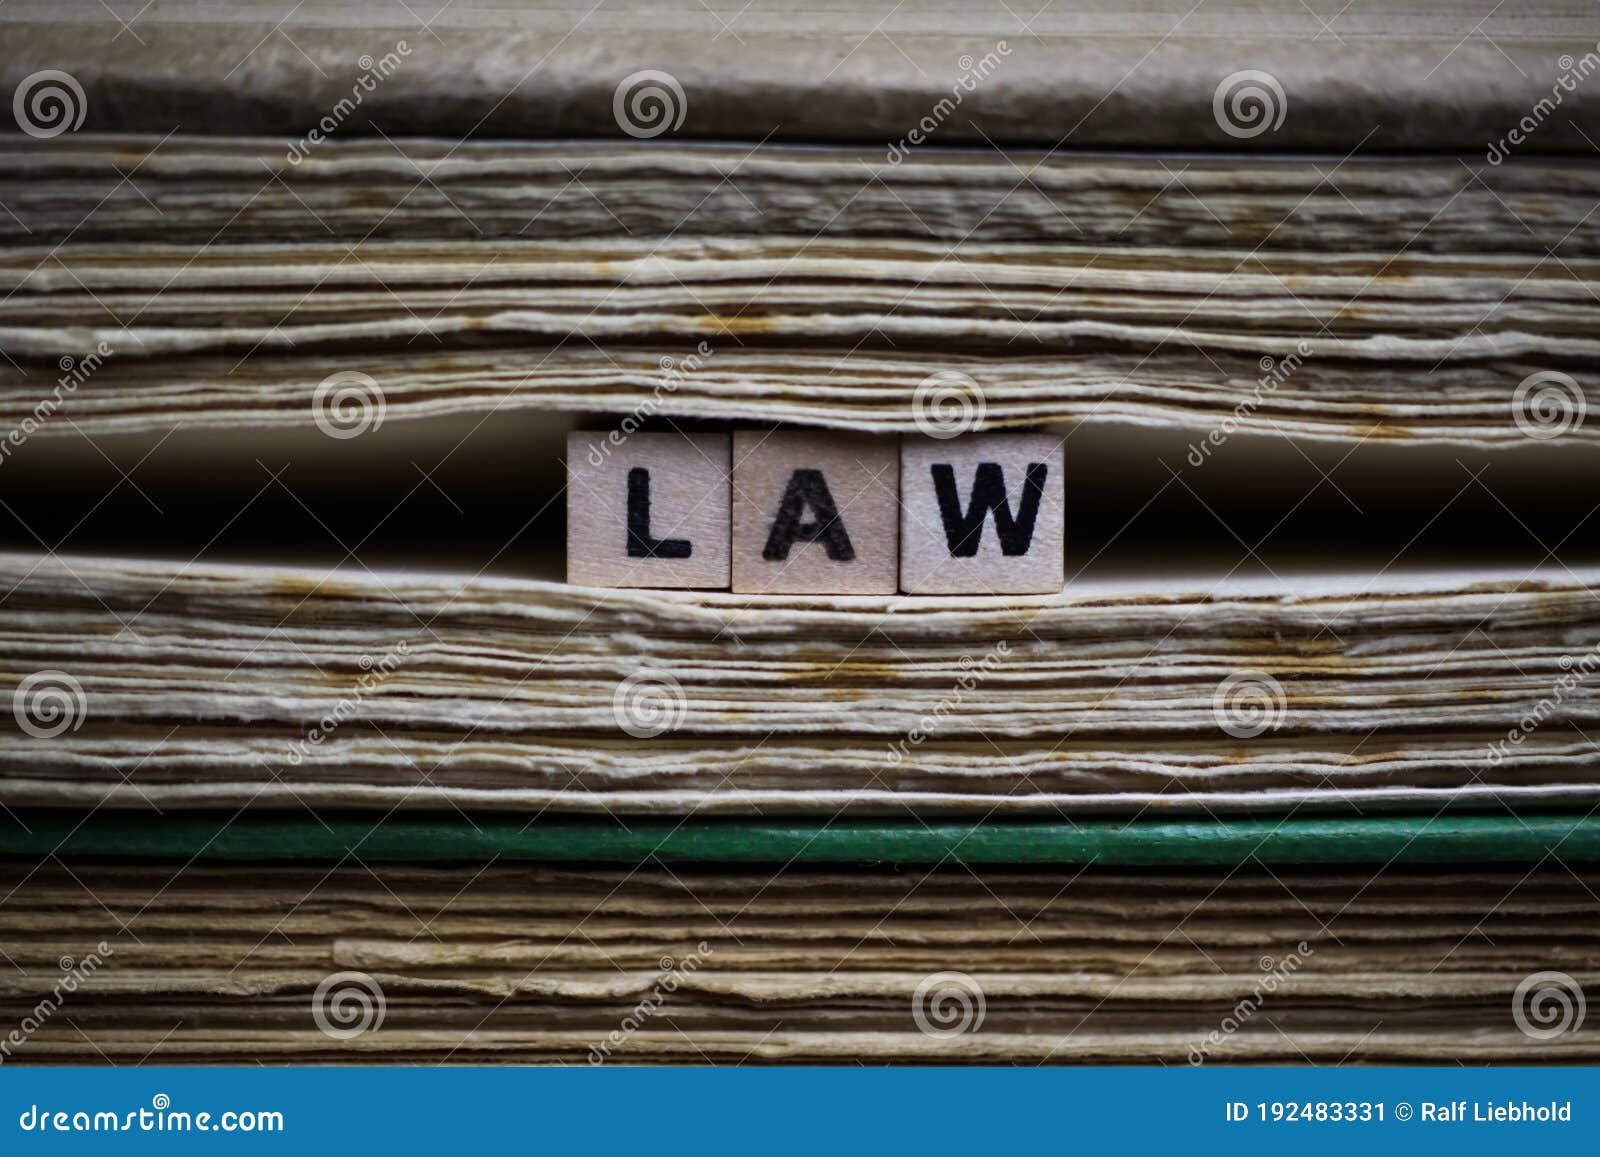 legal conditions framework concept: closeup of  antique old book pile text blocks and yellowed pages with wooden alphabet